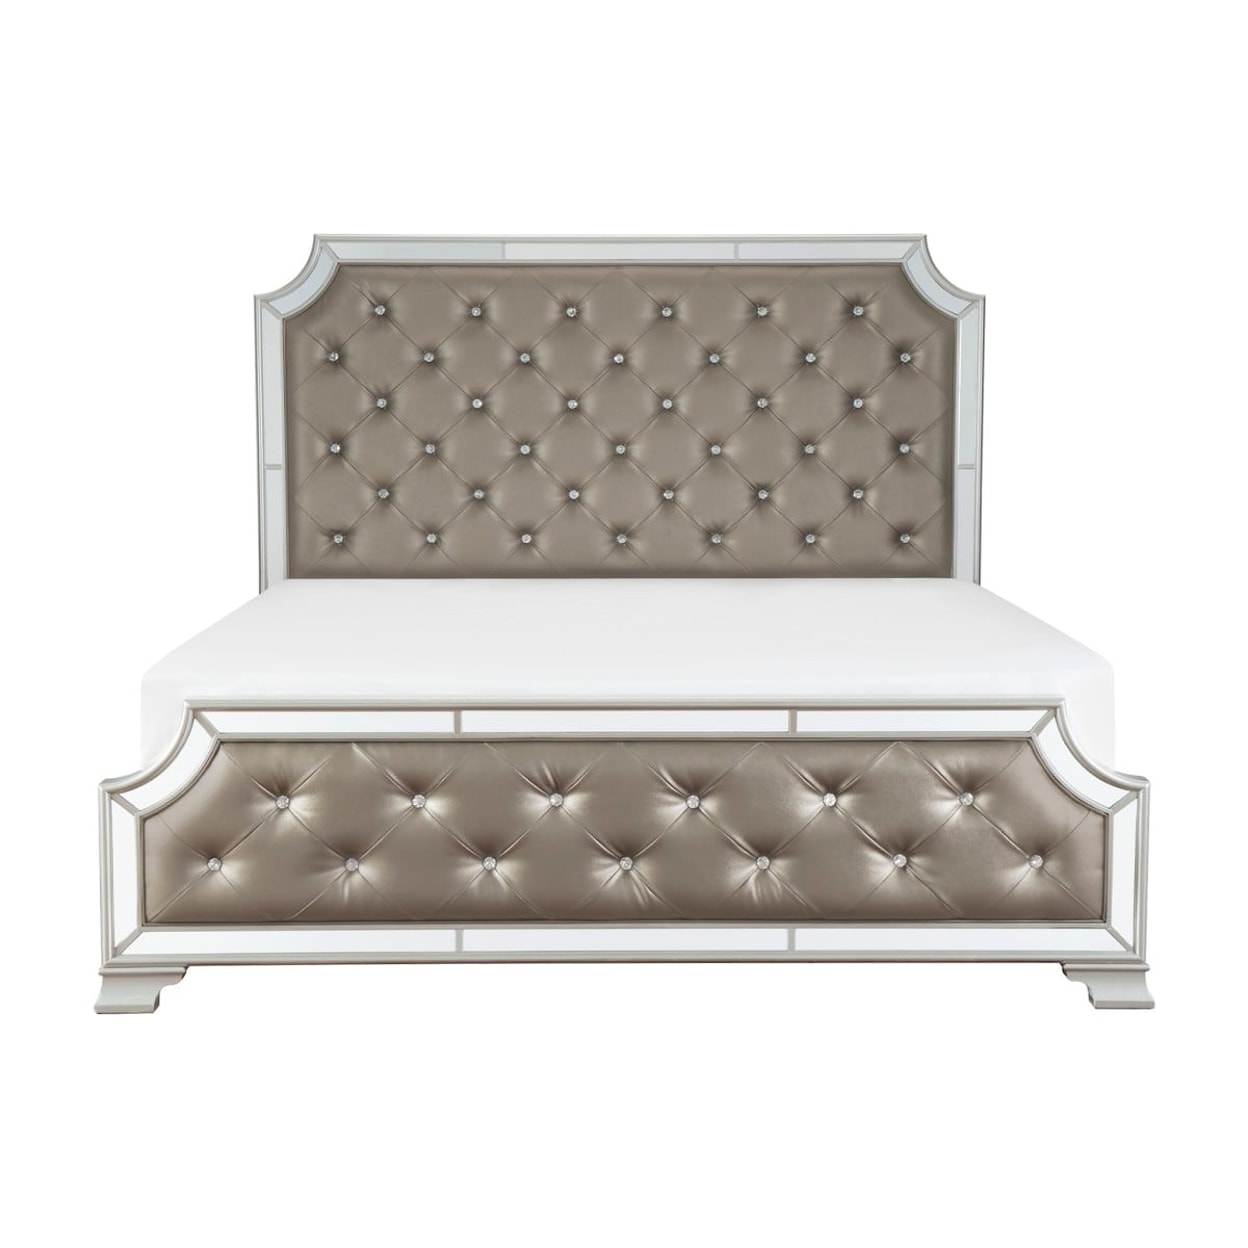 Homelegance Avondale Queen Upholstered Bed with Button Tufting